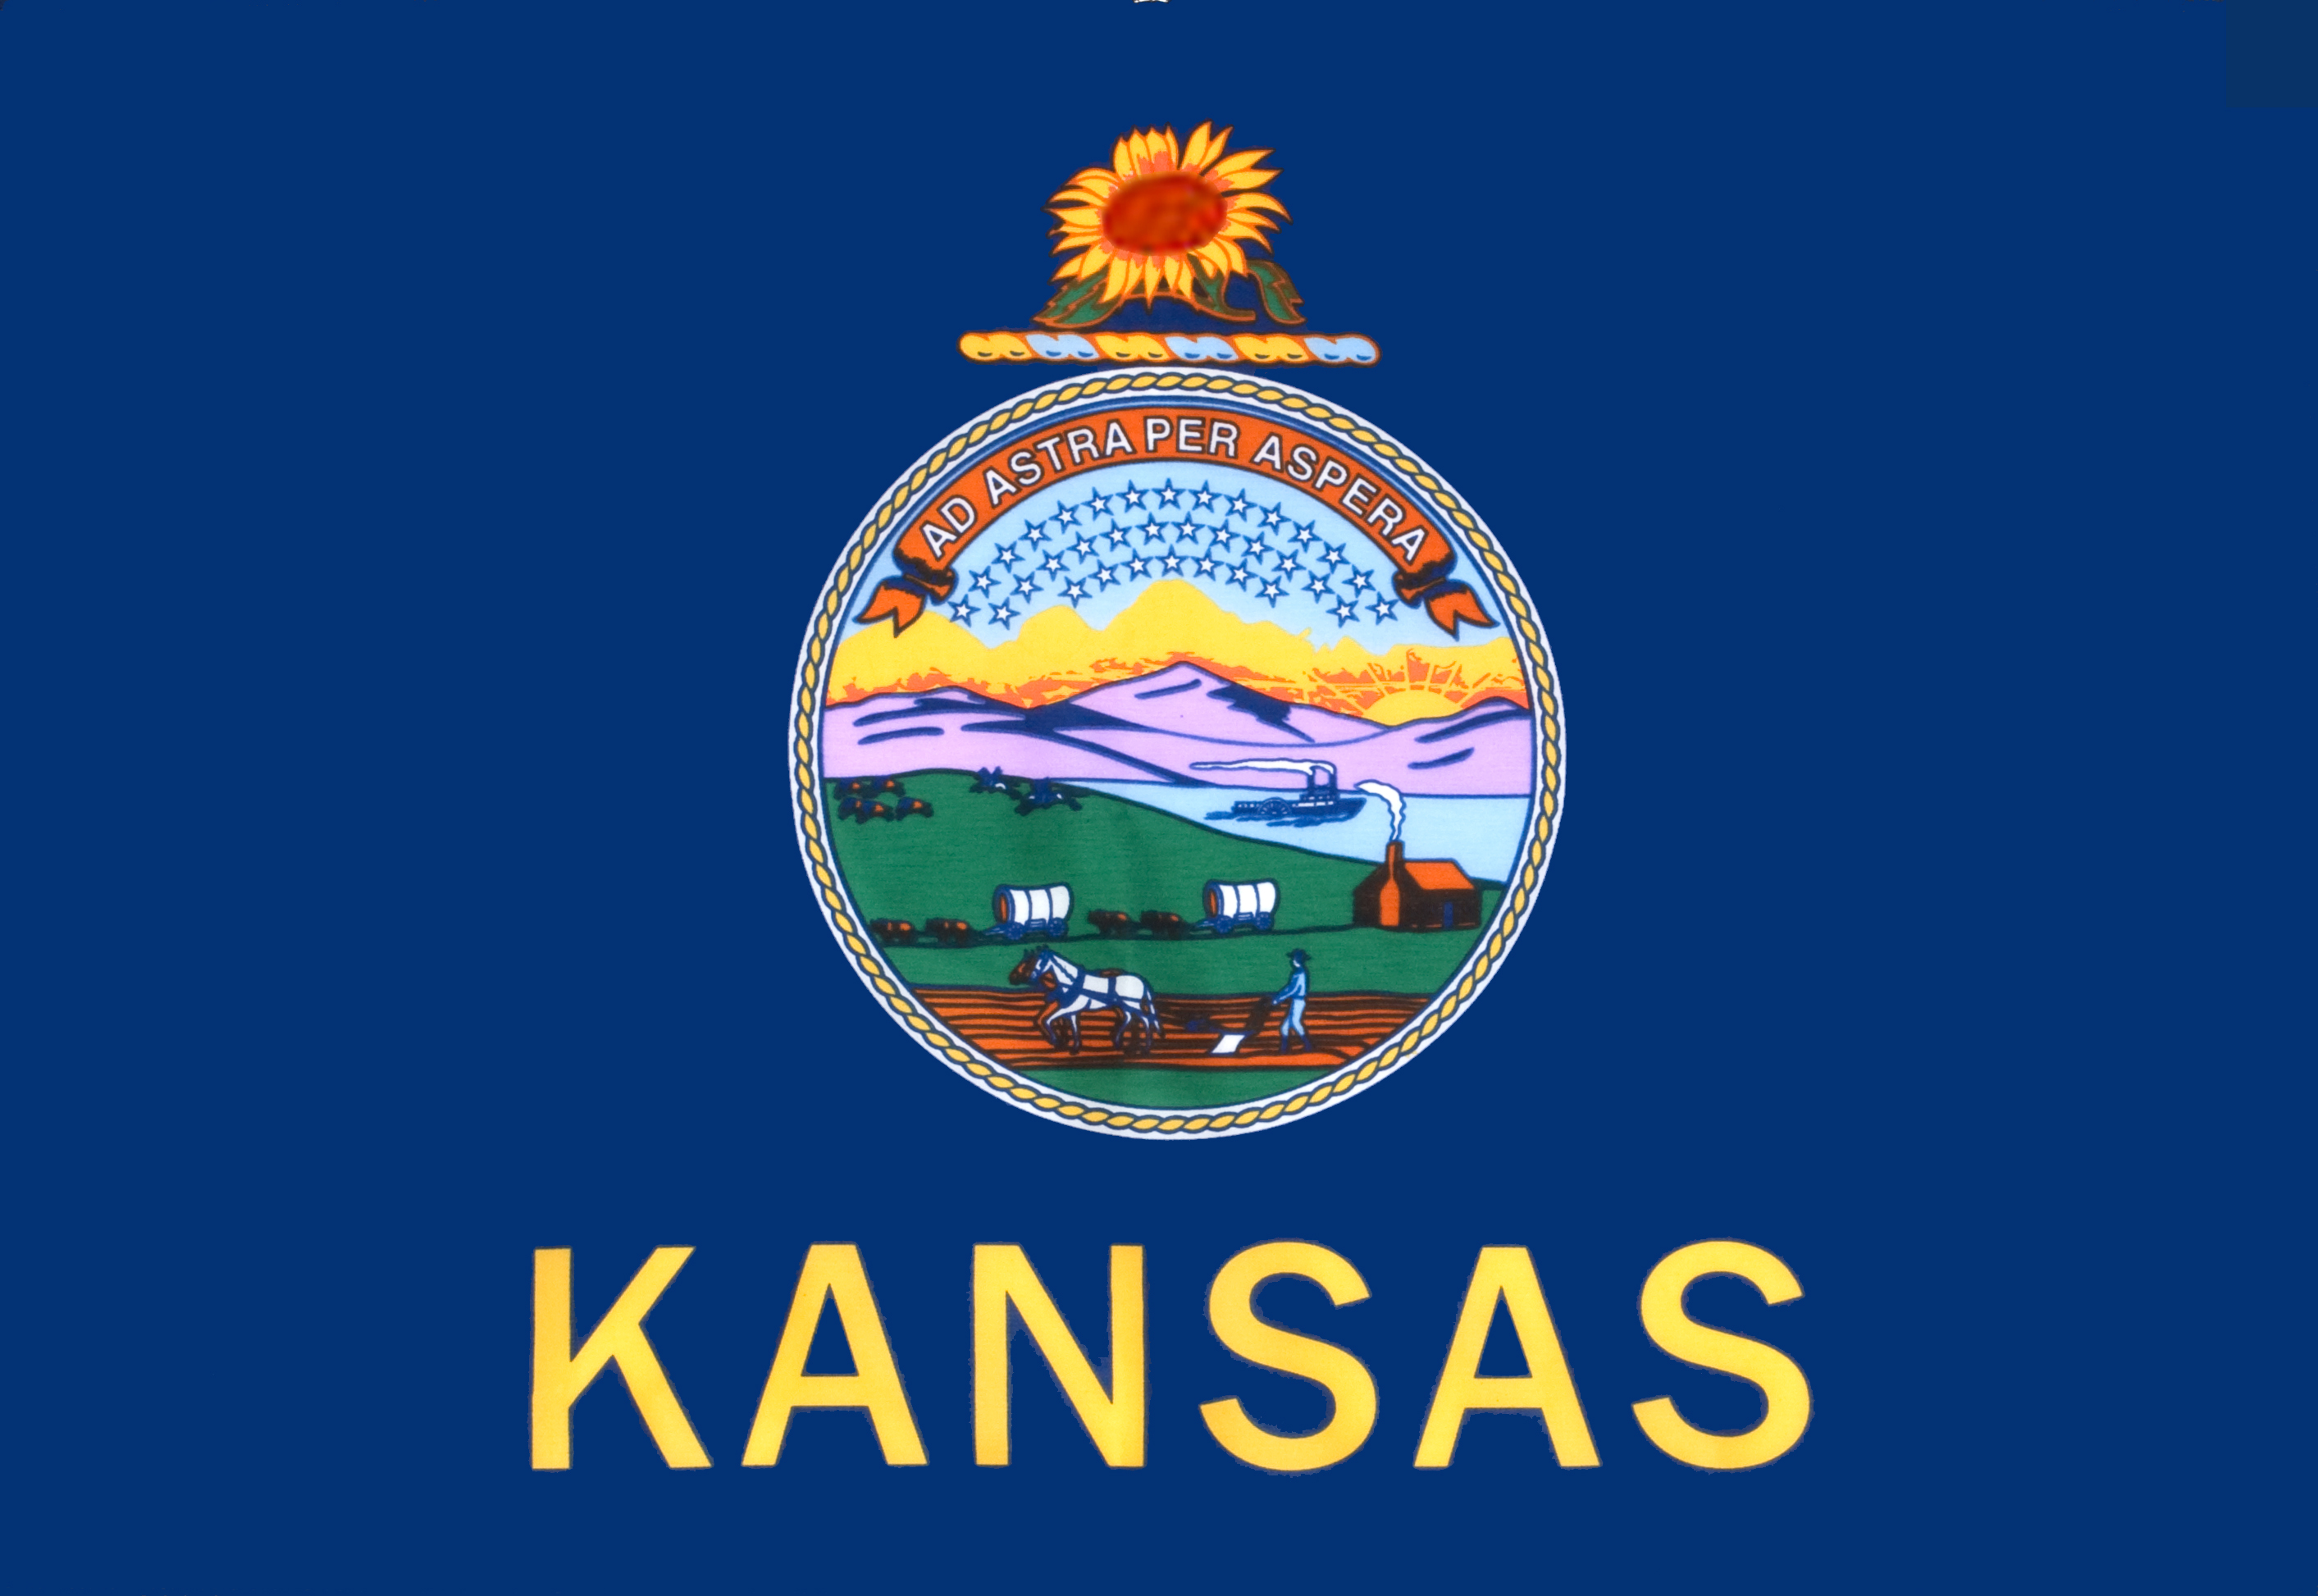 #KANSAS: Staying Central Is The Mission